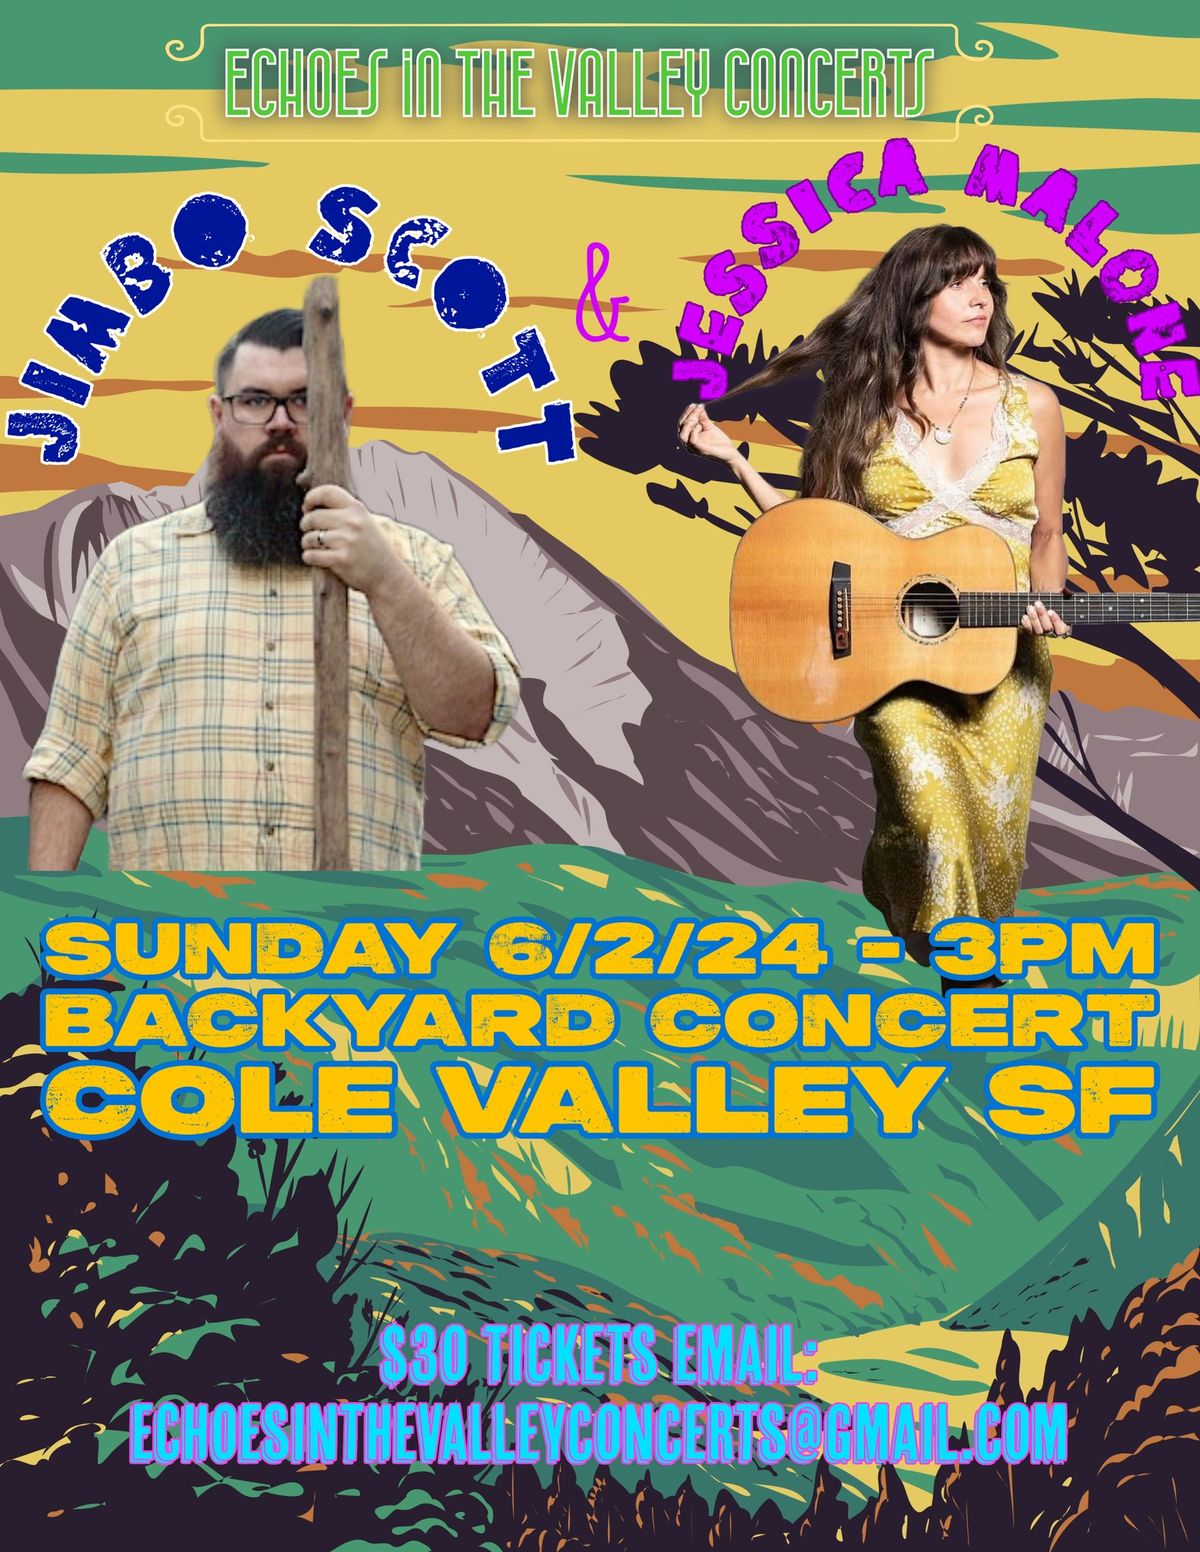 Jimbo Scott & Jessica Malone - Live @ Echoes in the Valley